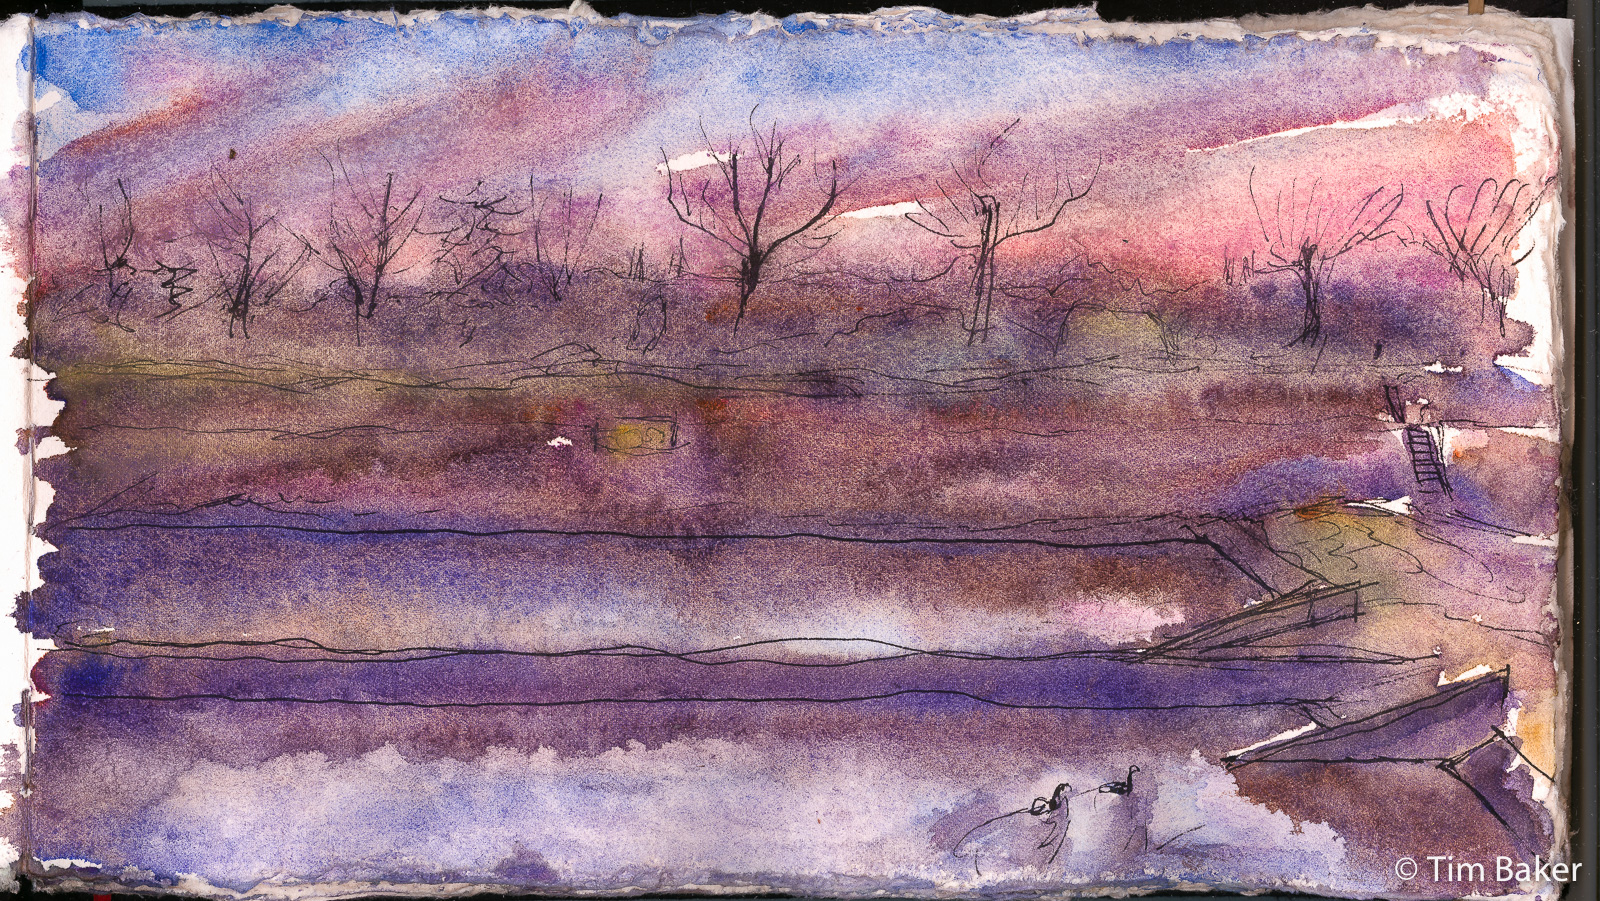 Two Geese (Filter Beds At Night), Watercolour and Fountain Pen, Artway Panoramic Cotton sketchbook.